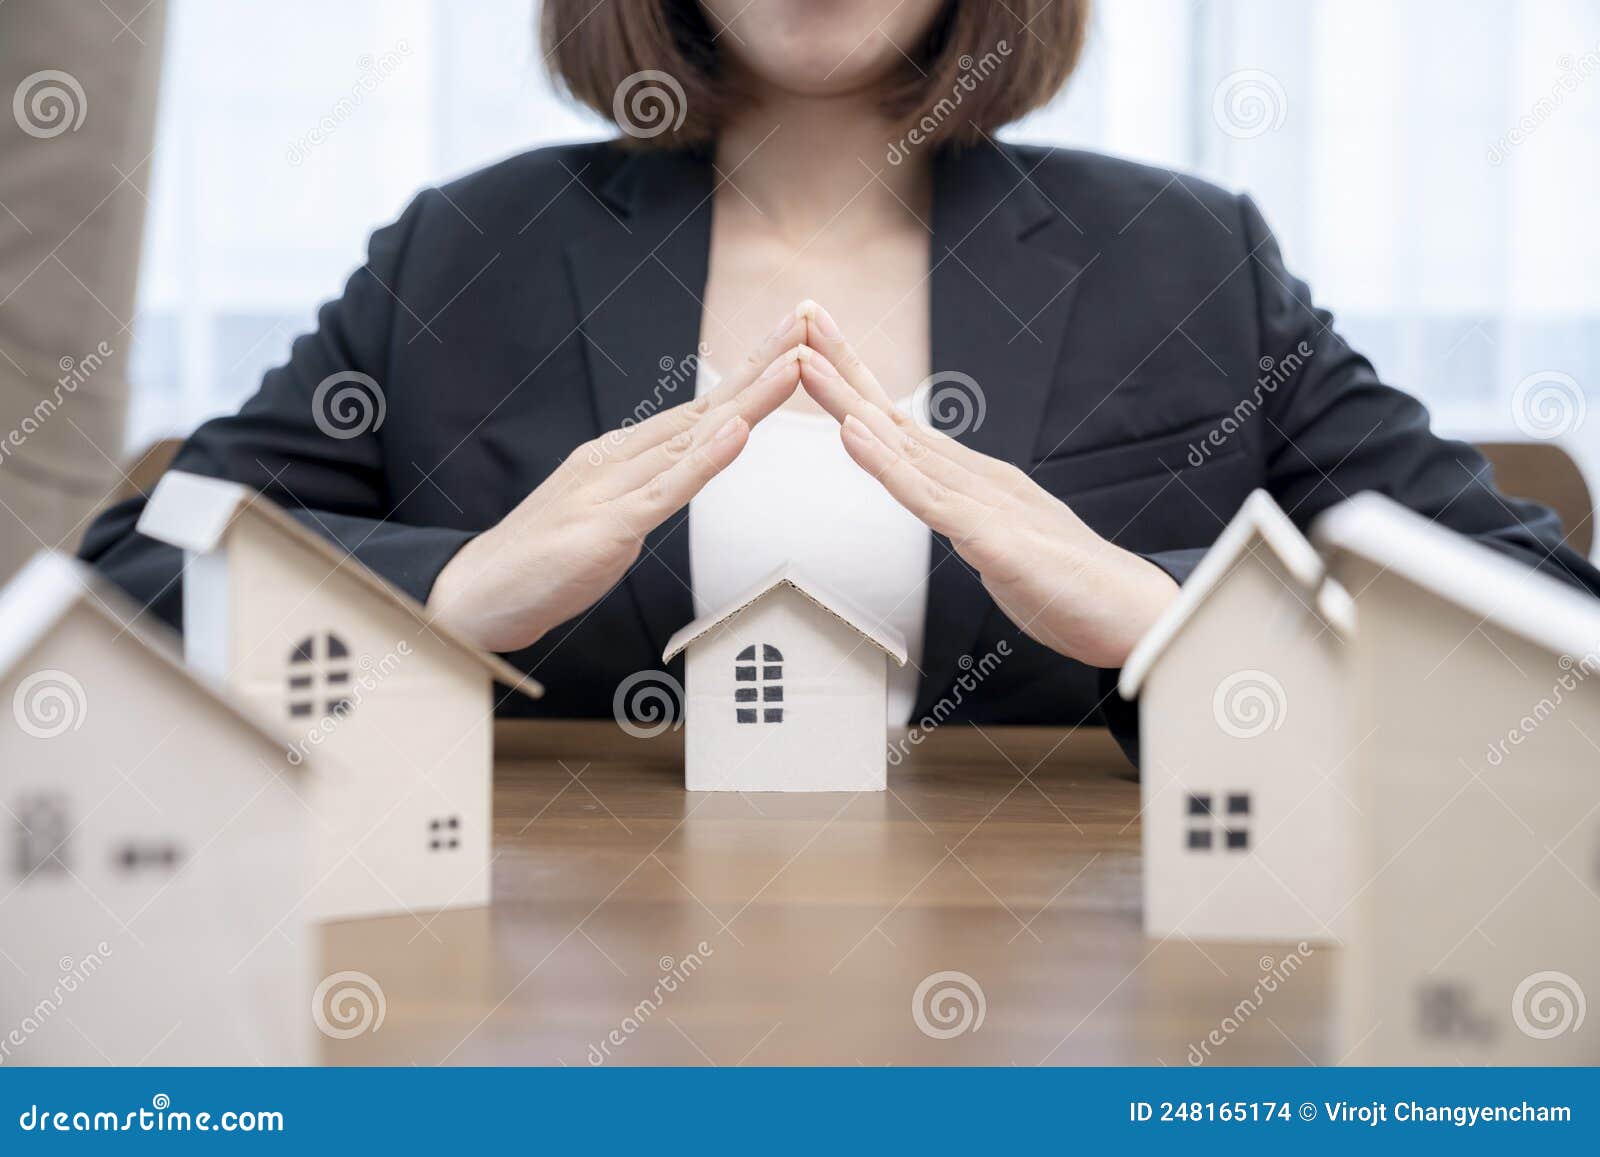 real estate insurance or safeness concept